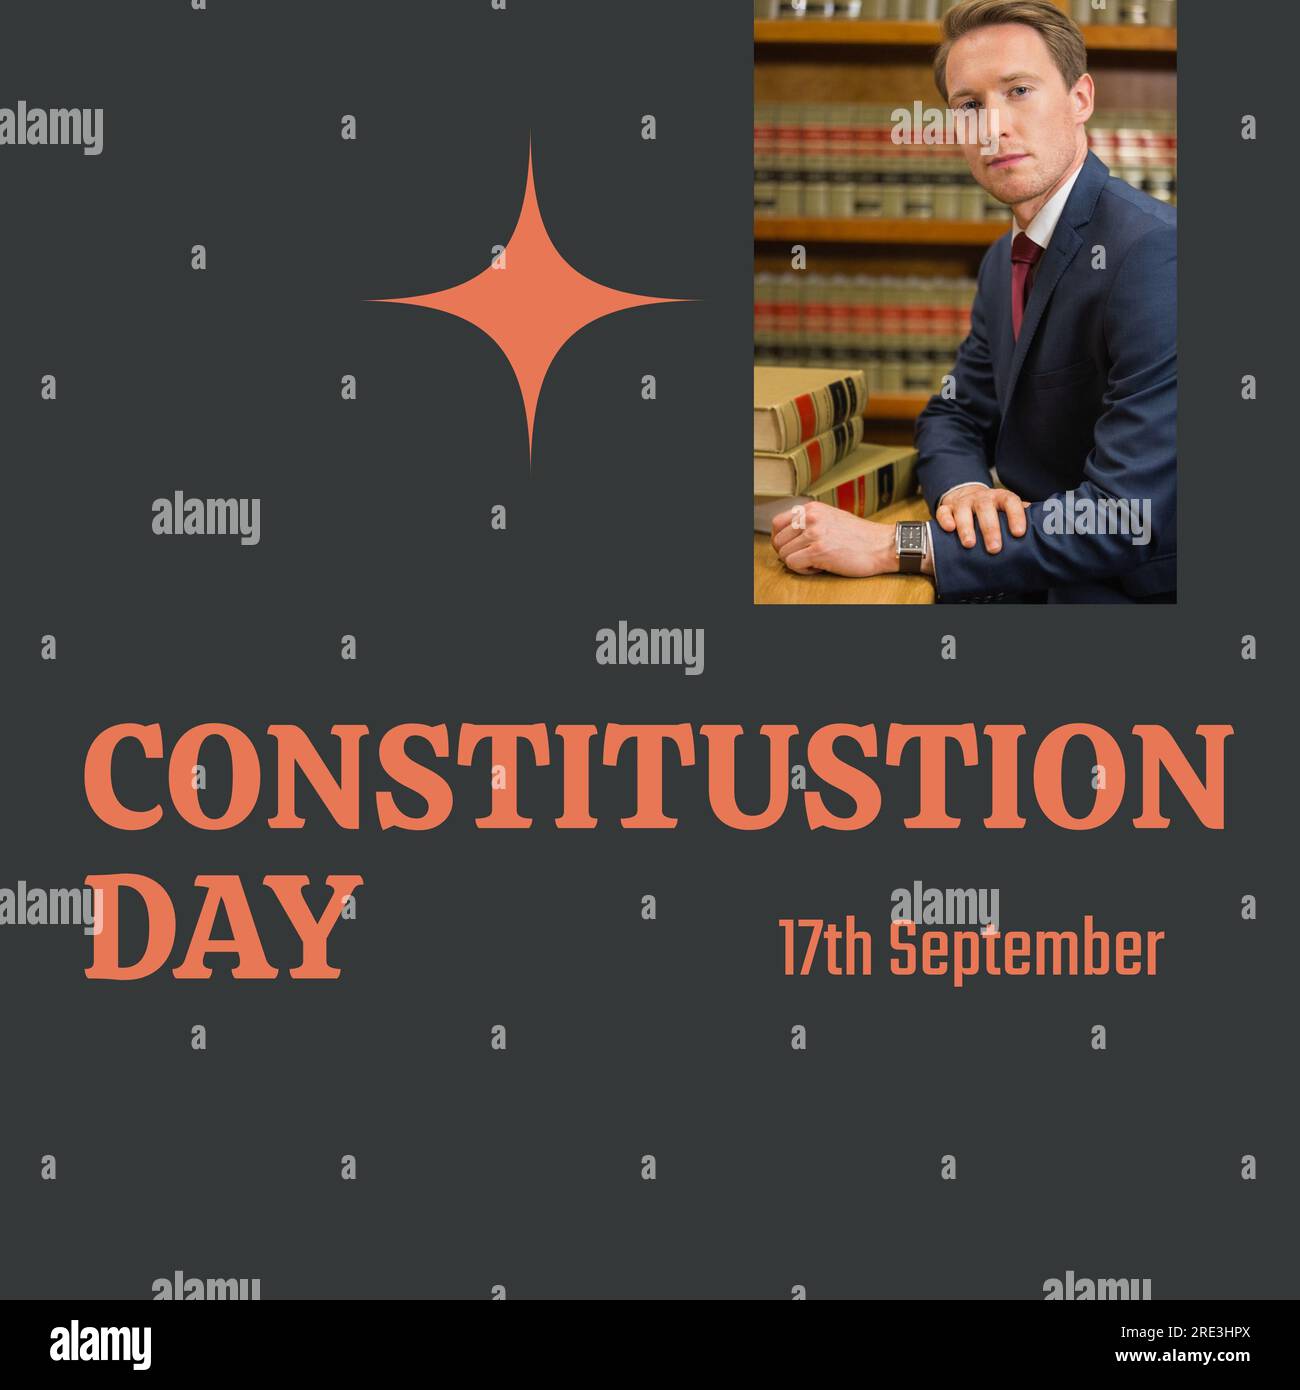 Constitution day text in orange on black with caucasian male attorney in library with books Stock Photo